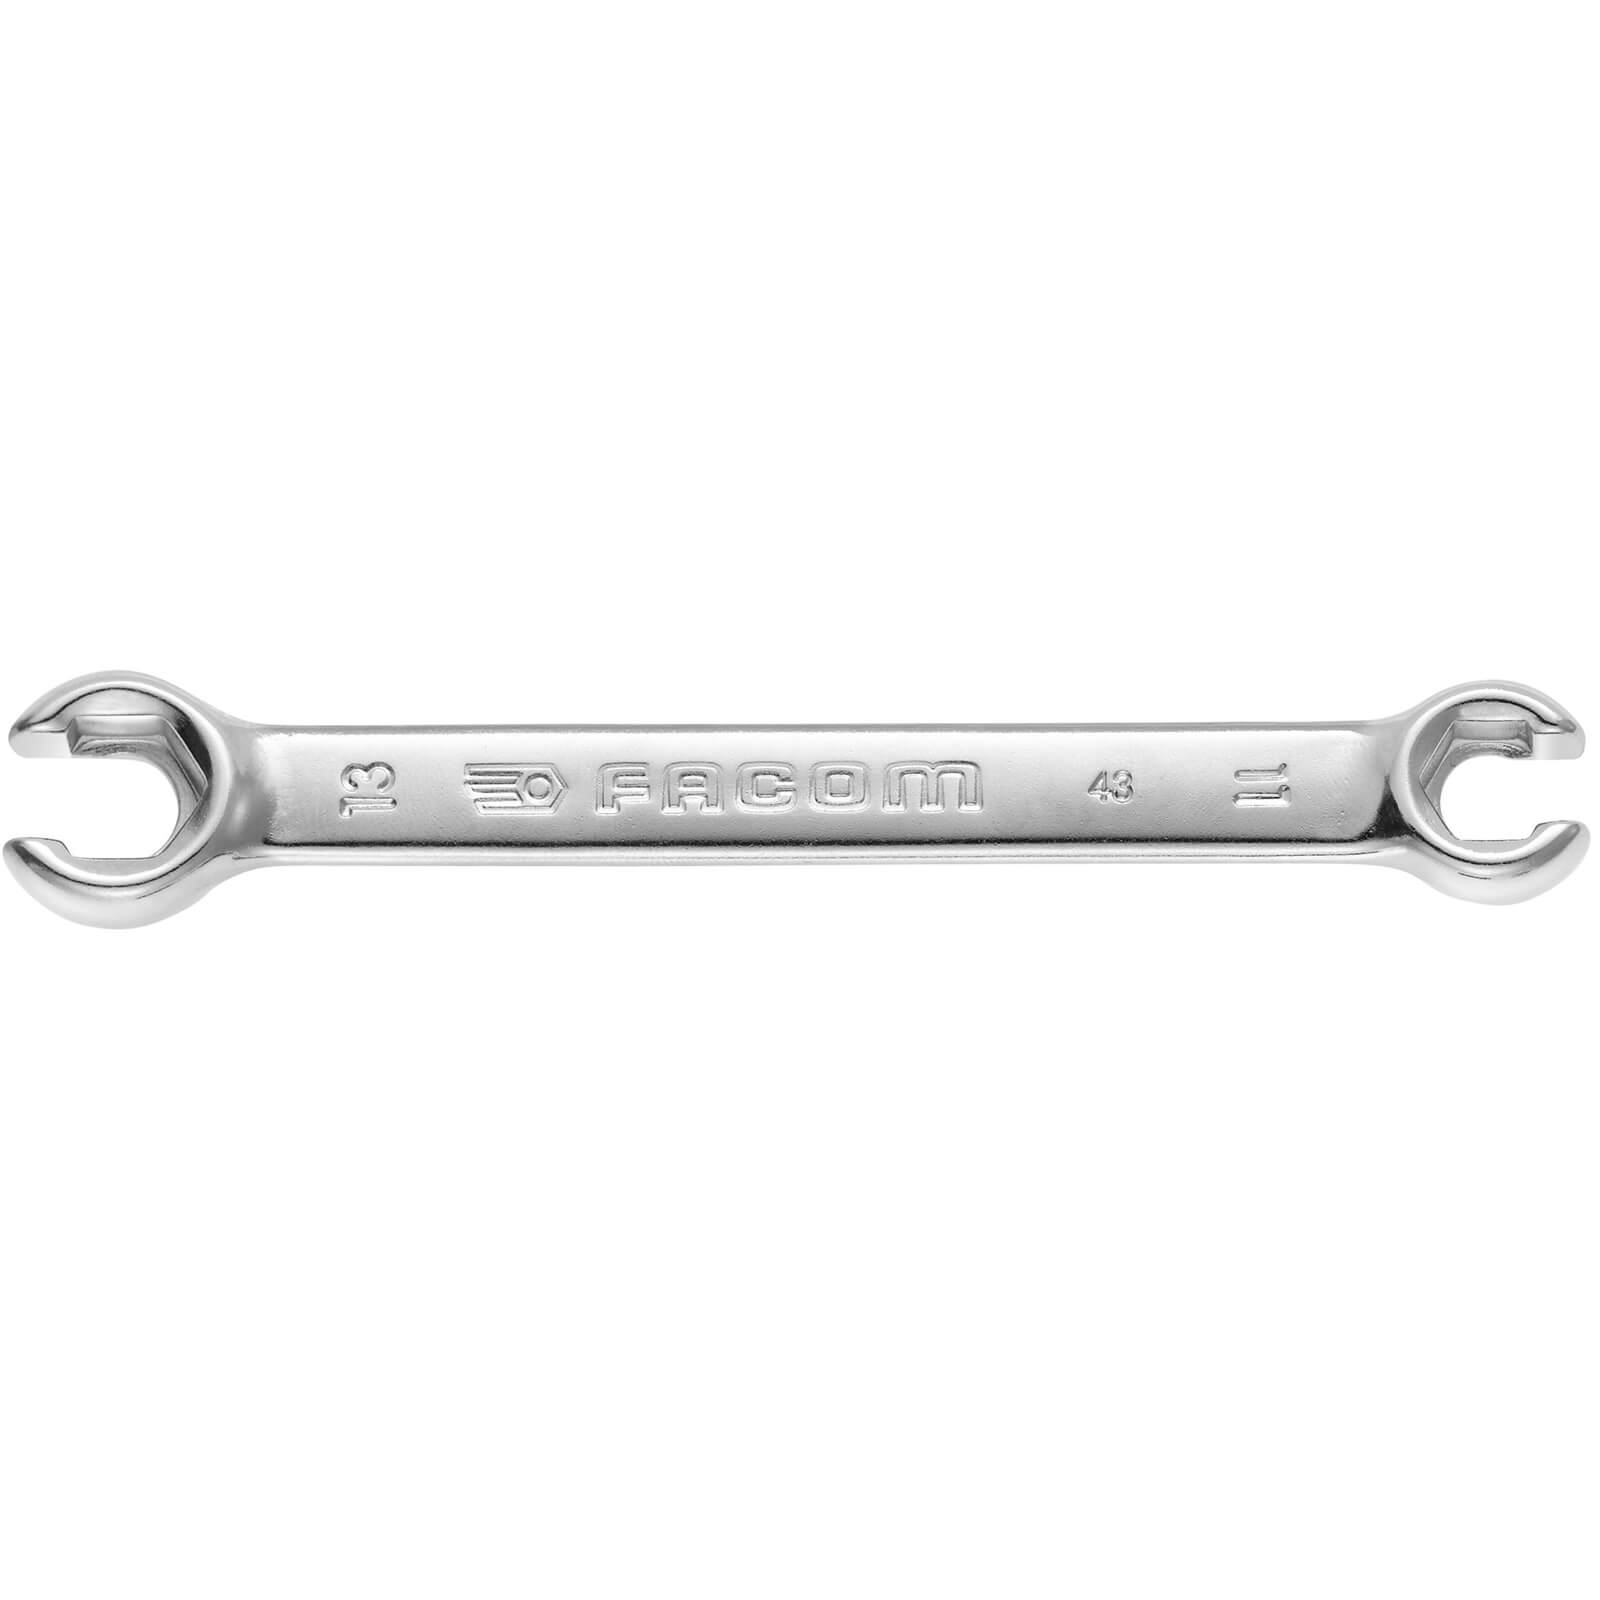 Image of Facom Straight Flare Nut Wrench Metric 11mm x 13mm